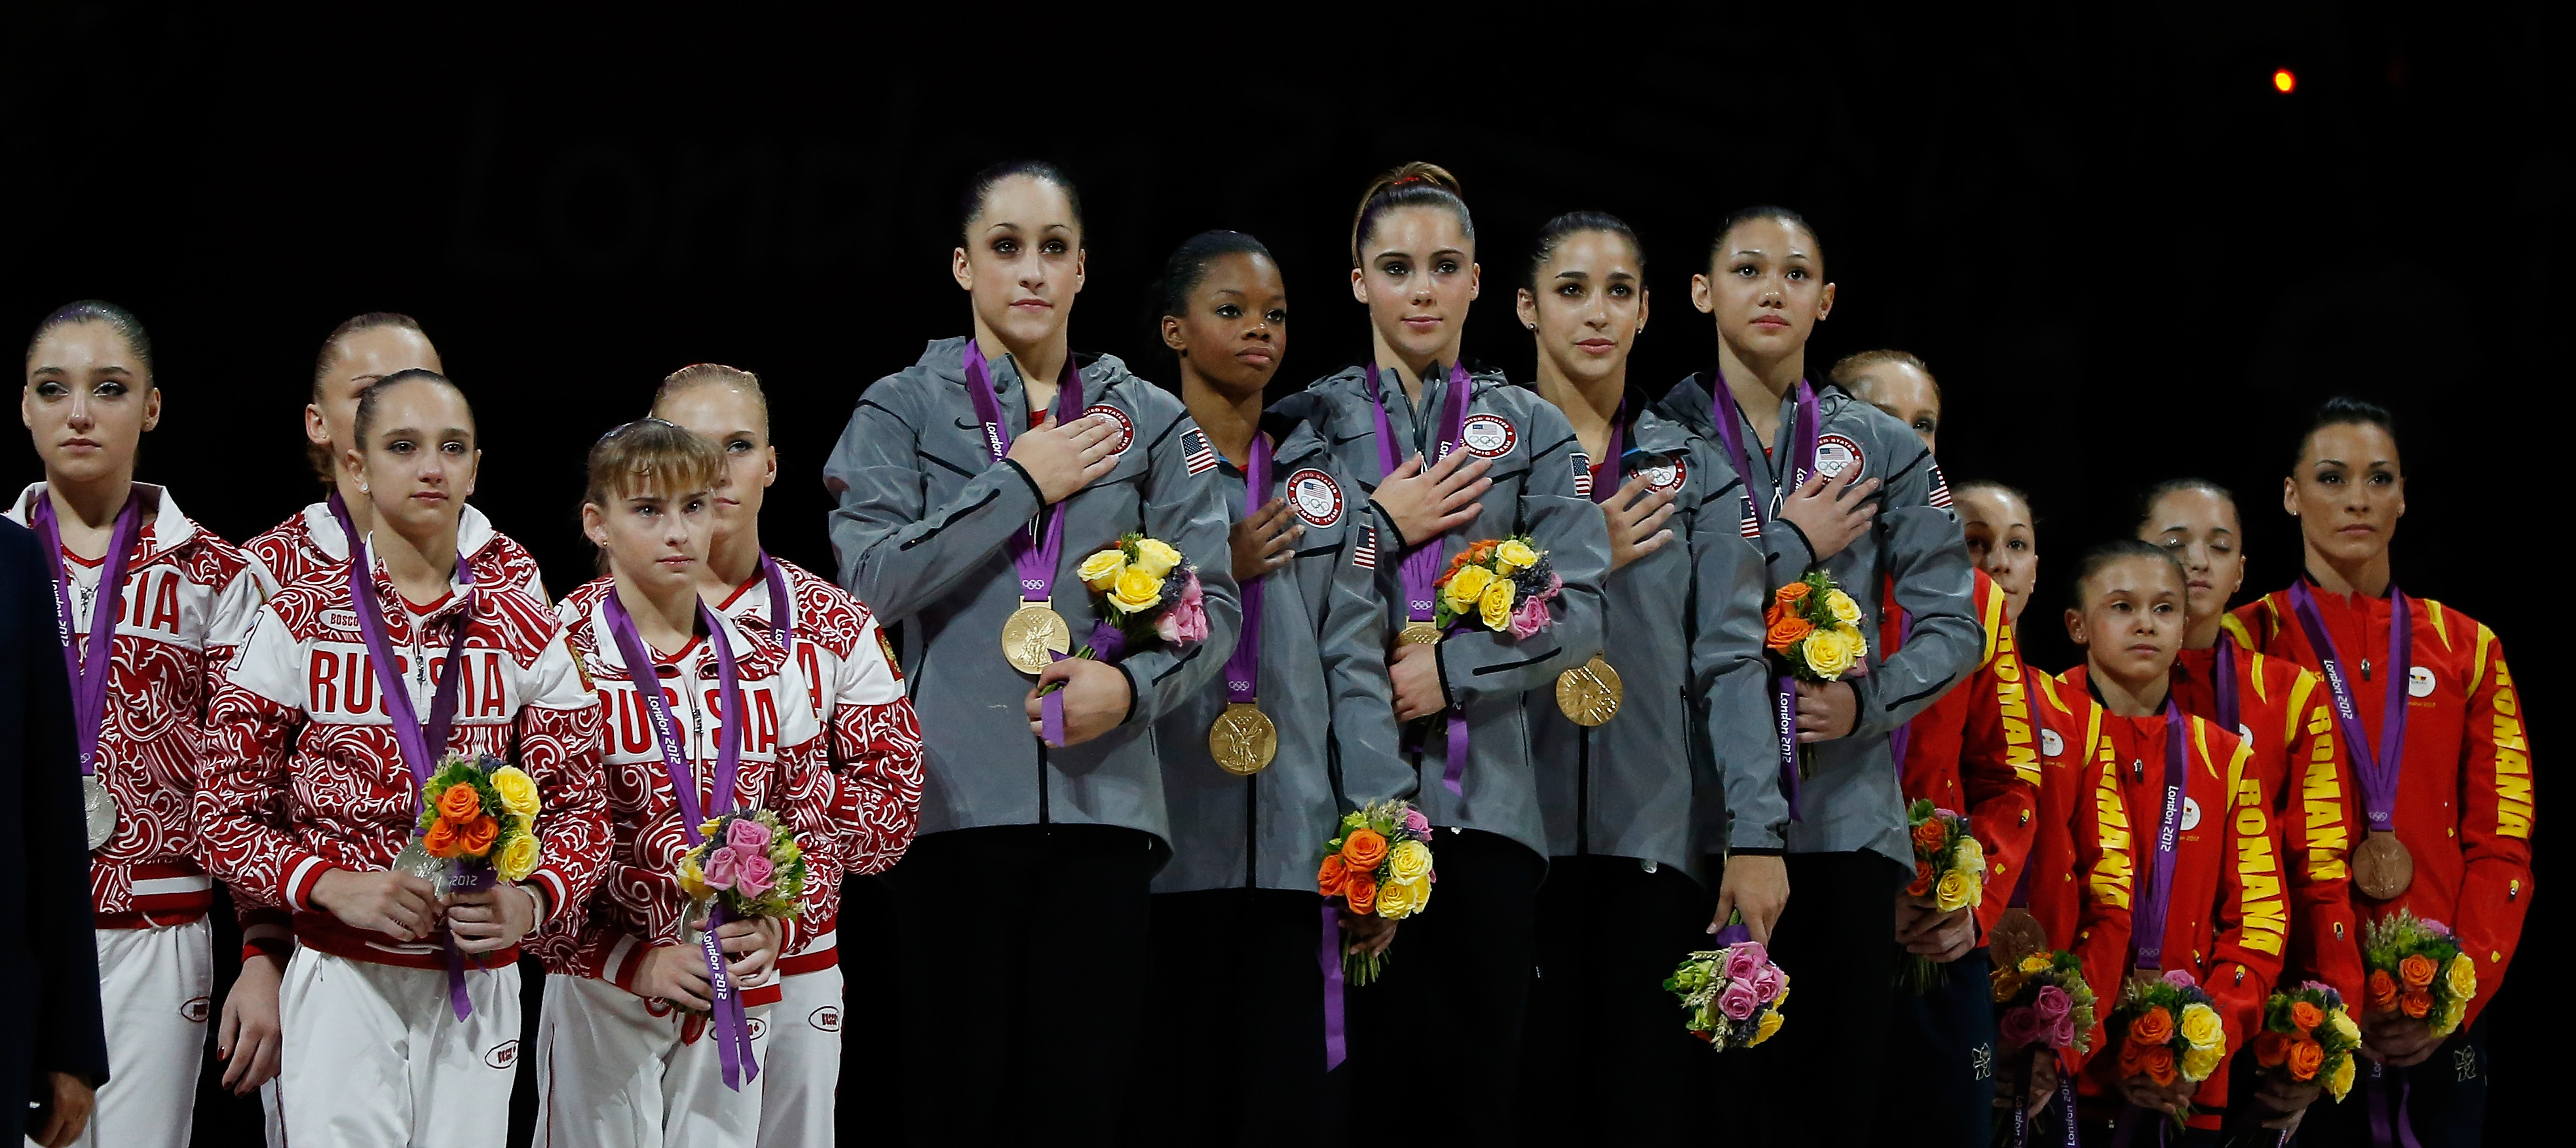 Silver medalists Russia, gold medalists United States and bronze medalists Romania pose of the podium after the Artistic Gymnastics Women's Team final on Day 4 of the London 2012 Olympic Games at North Greenwich Arena on July 31, 2012 in London.